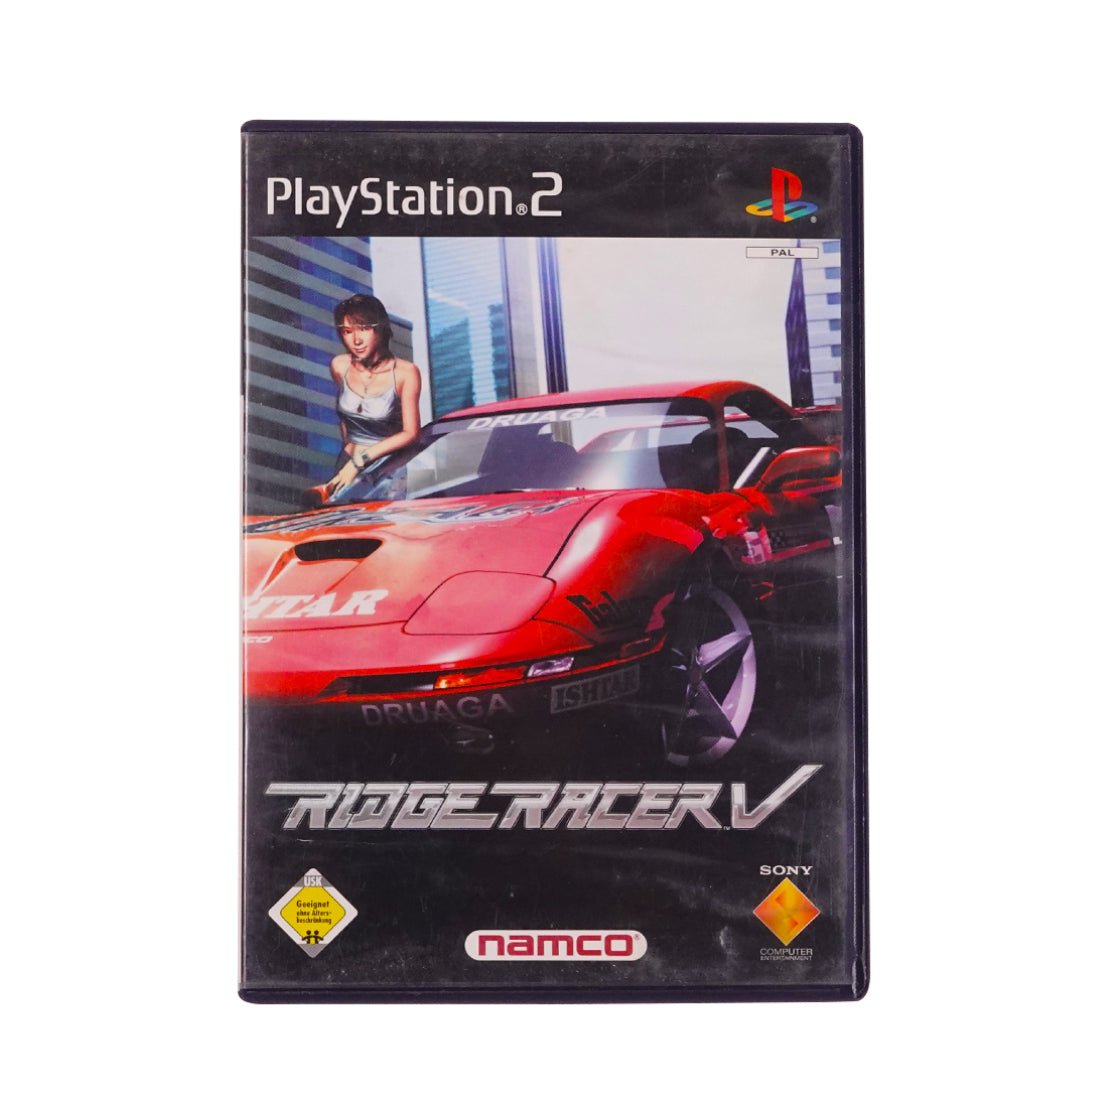 (Pre-Owned) Ridge Racer V - PlayStation 2 - Store 974 | ستور ٩٧٤